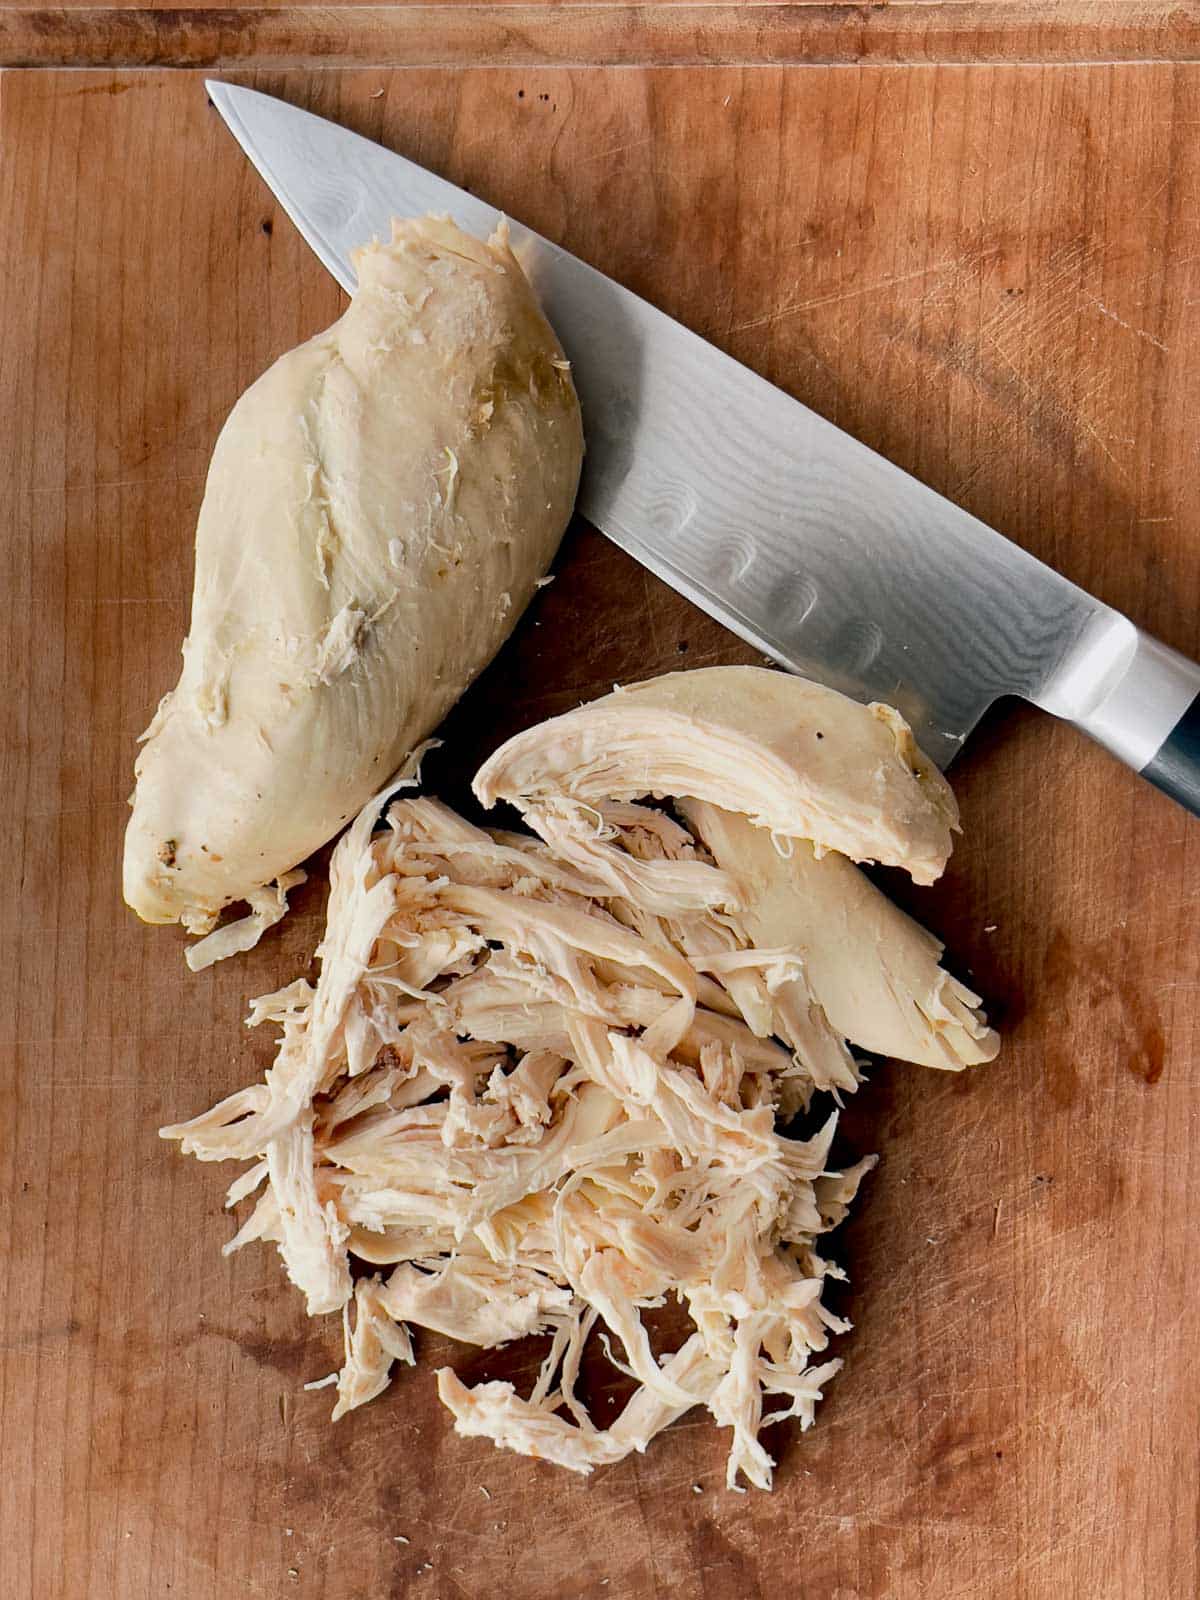 A whole cooked chicken breast and a pile of shredded chicken breast on top of a wooden cutting board with a chef's knife on the side.